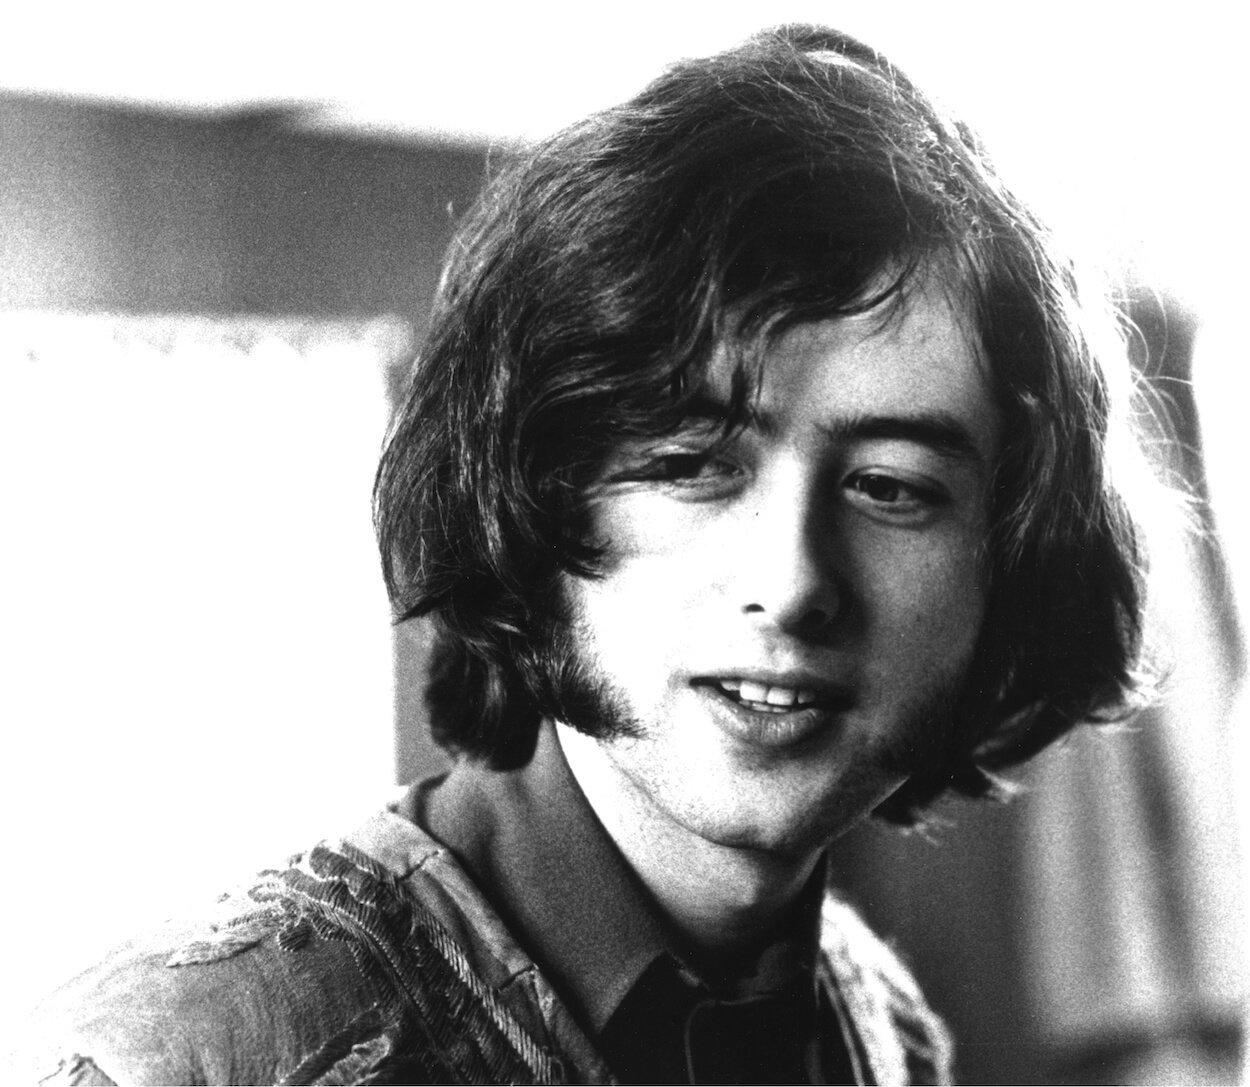 Yardbirds guitarist Jimmy Page looks off to his side before a concert the band in Michigan in 1966.